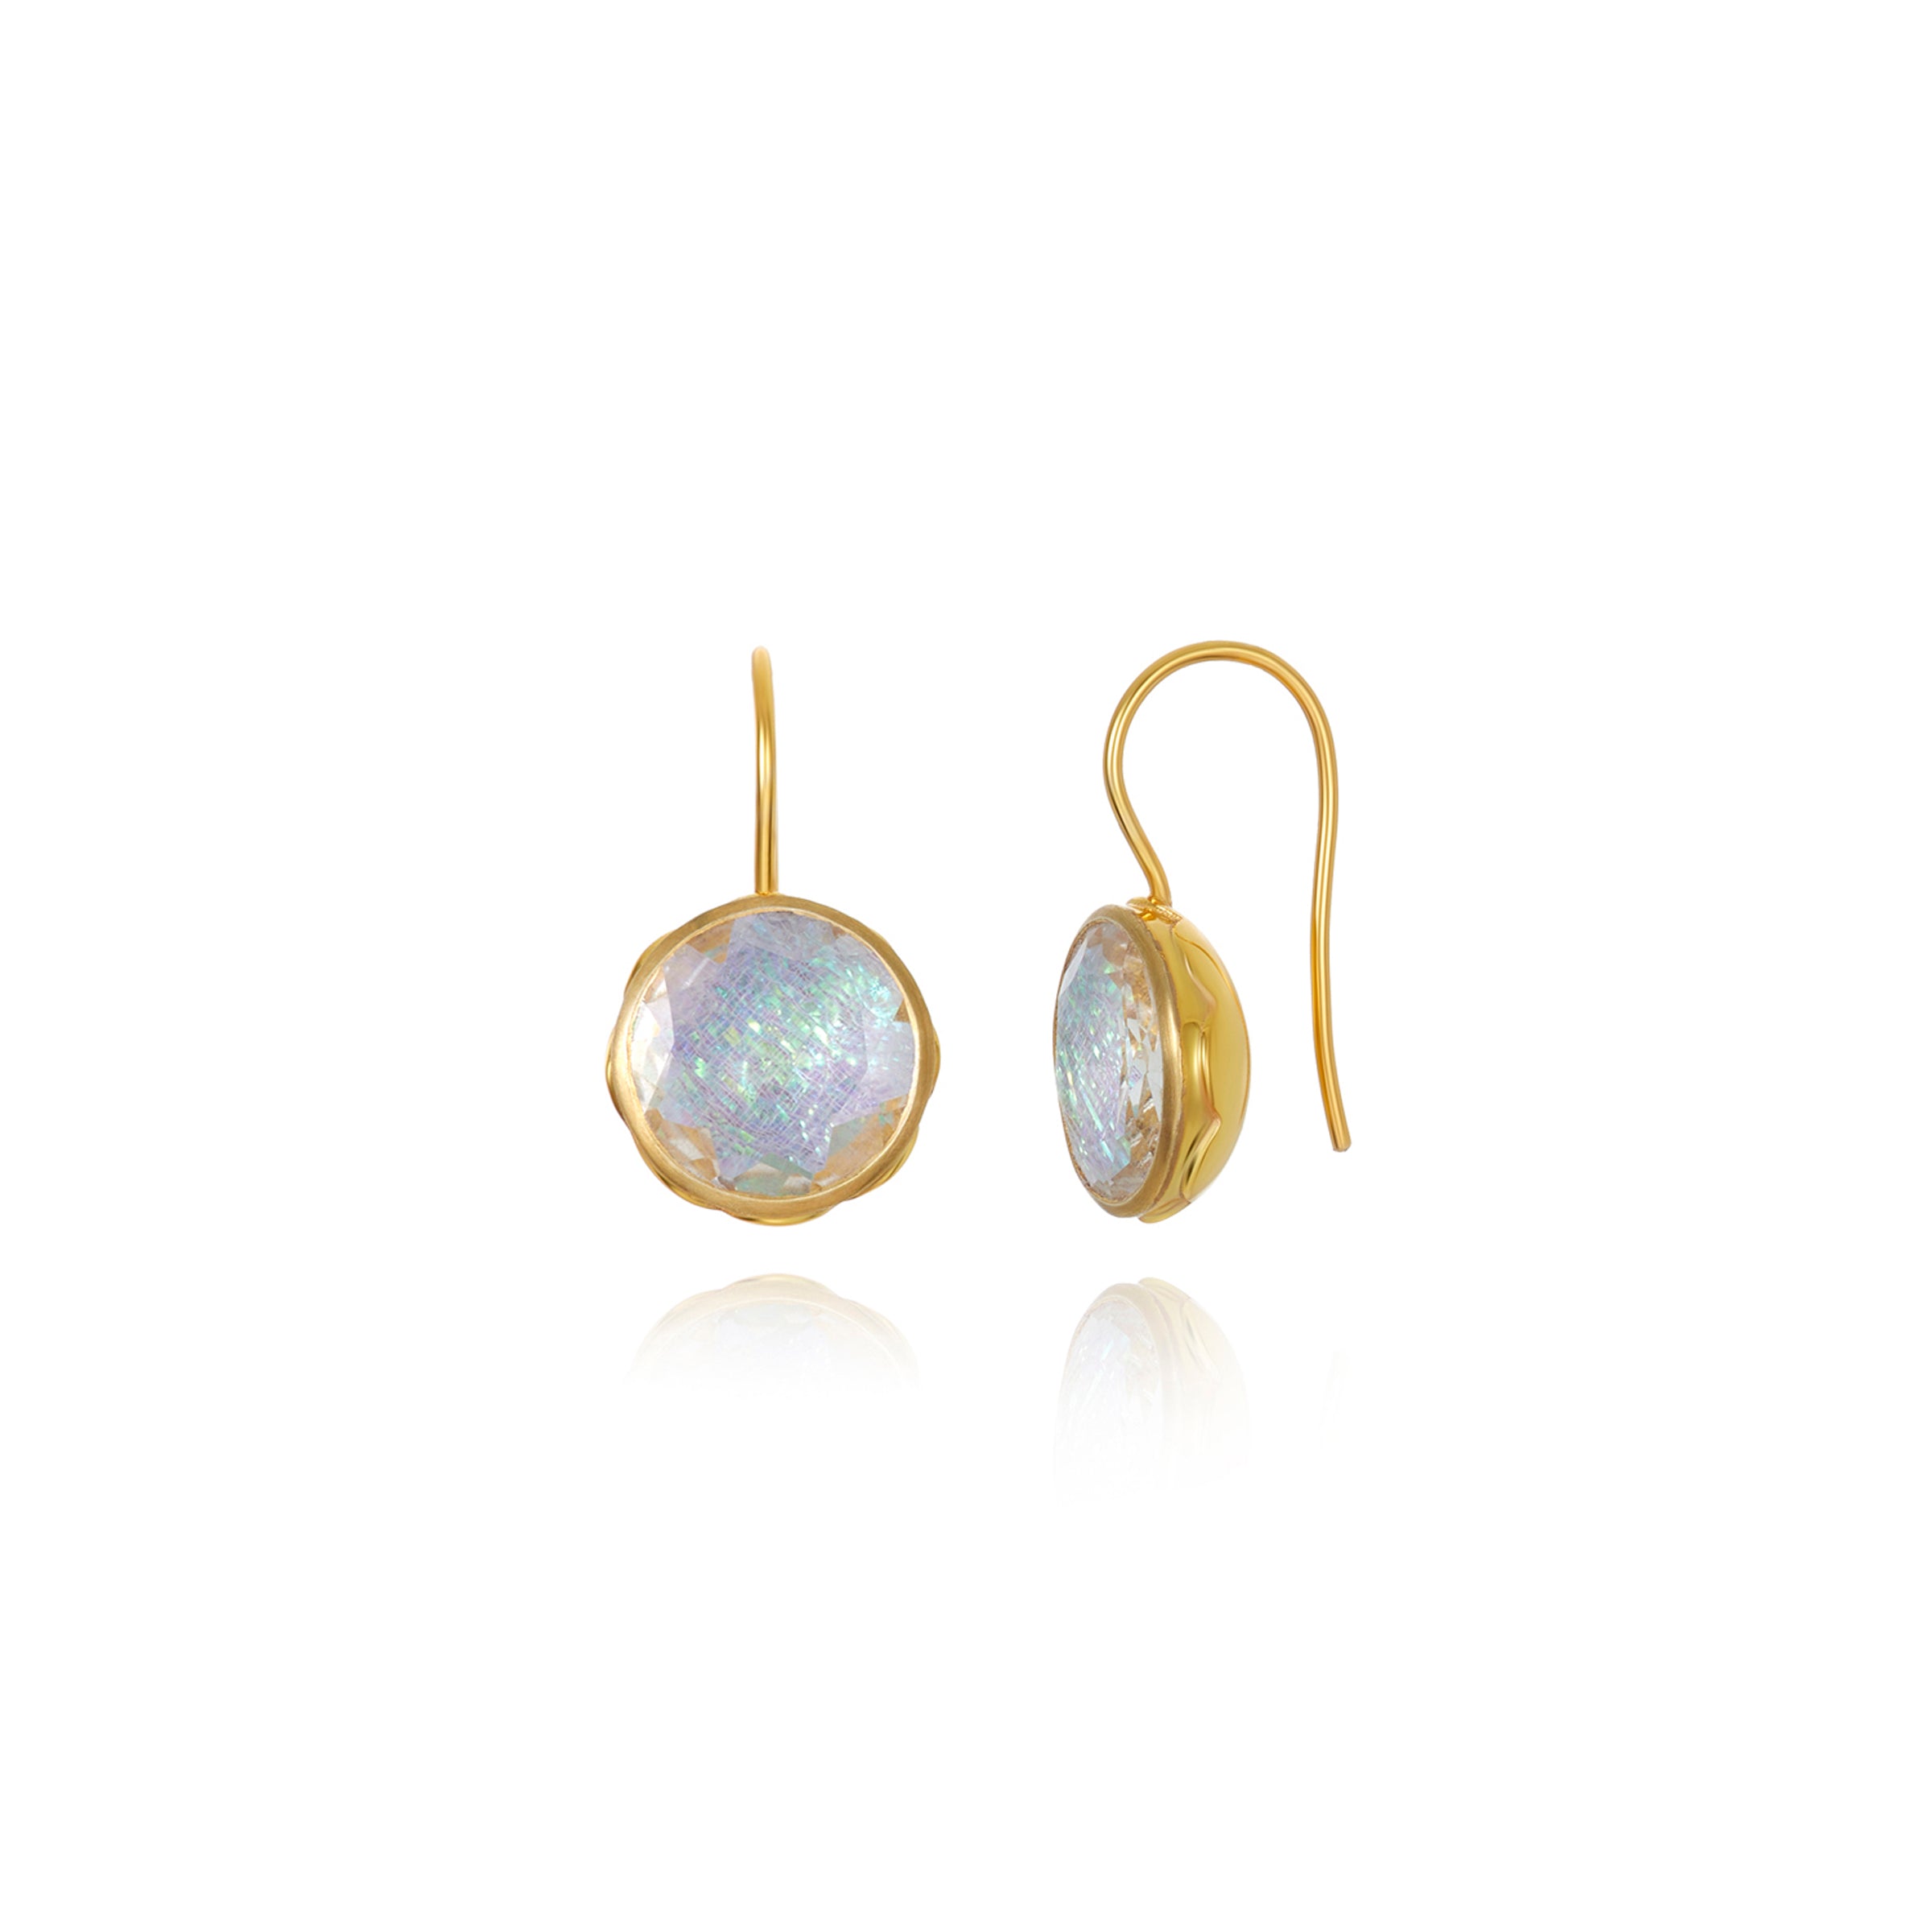 L&H Bride Button Earrings in Bliss (White Rhodium or Yellow Gold Wash)